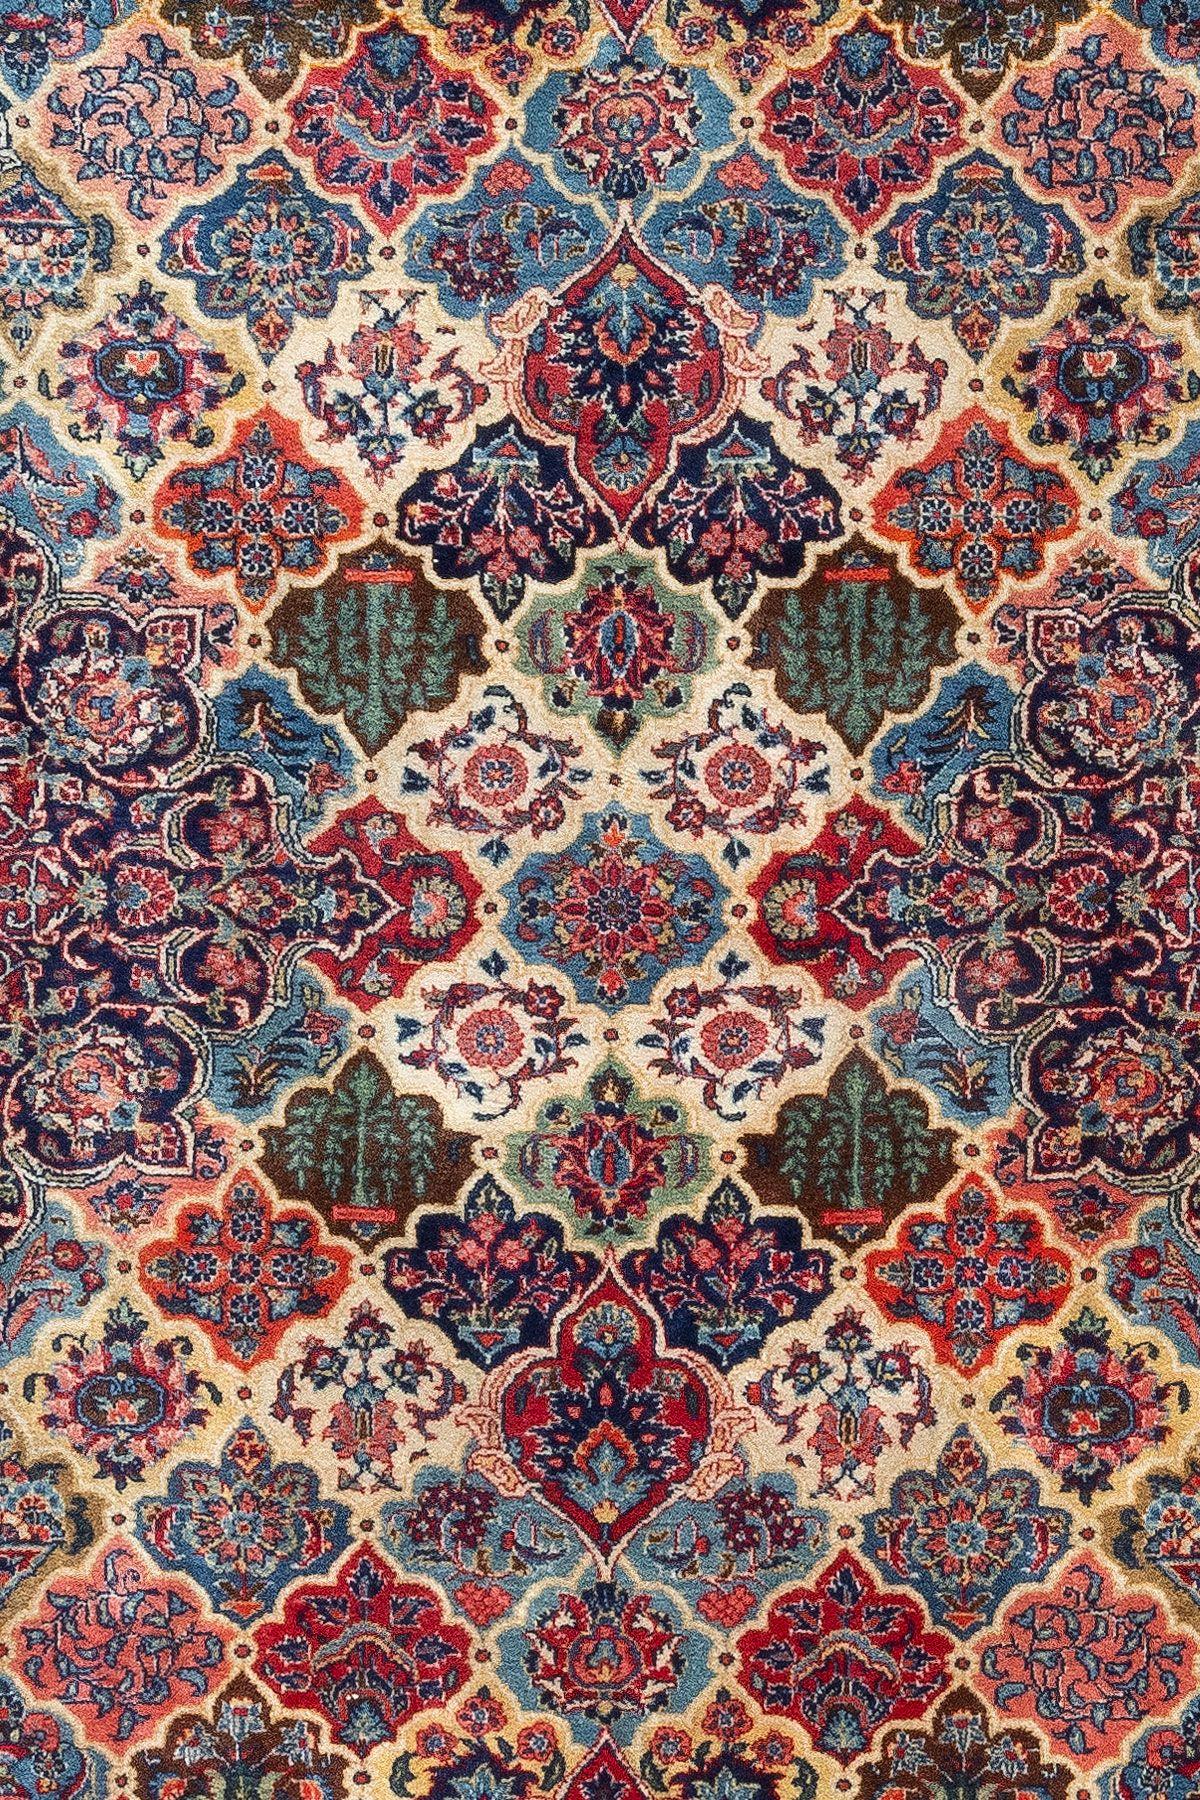 Zabihi Collection Jewel Toned Signed Oversize Persian Kashan Rug In Good Condition For Sale In New York, NY